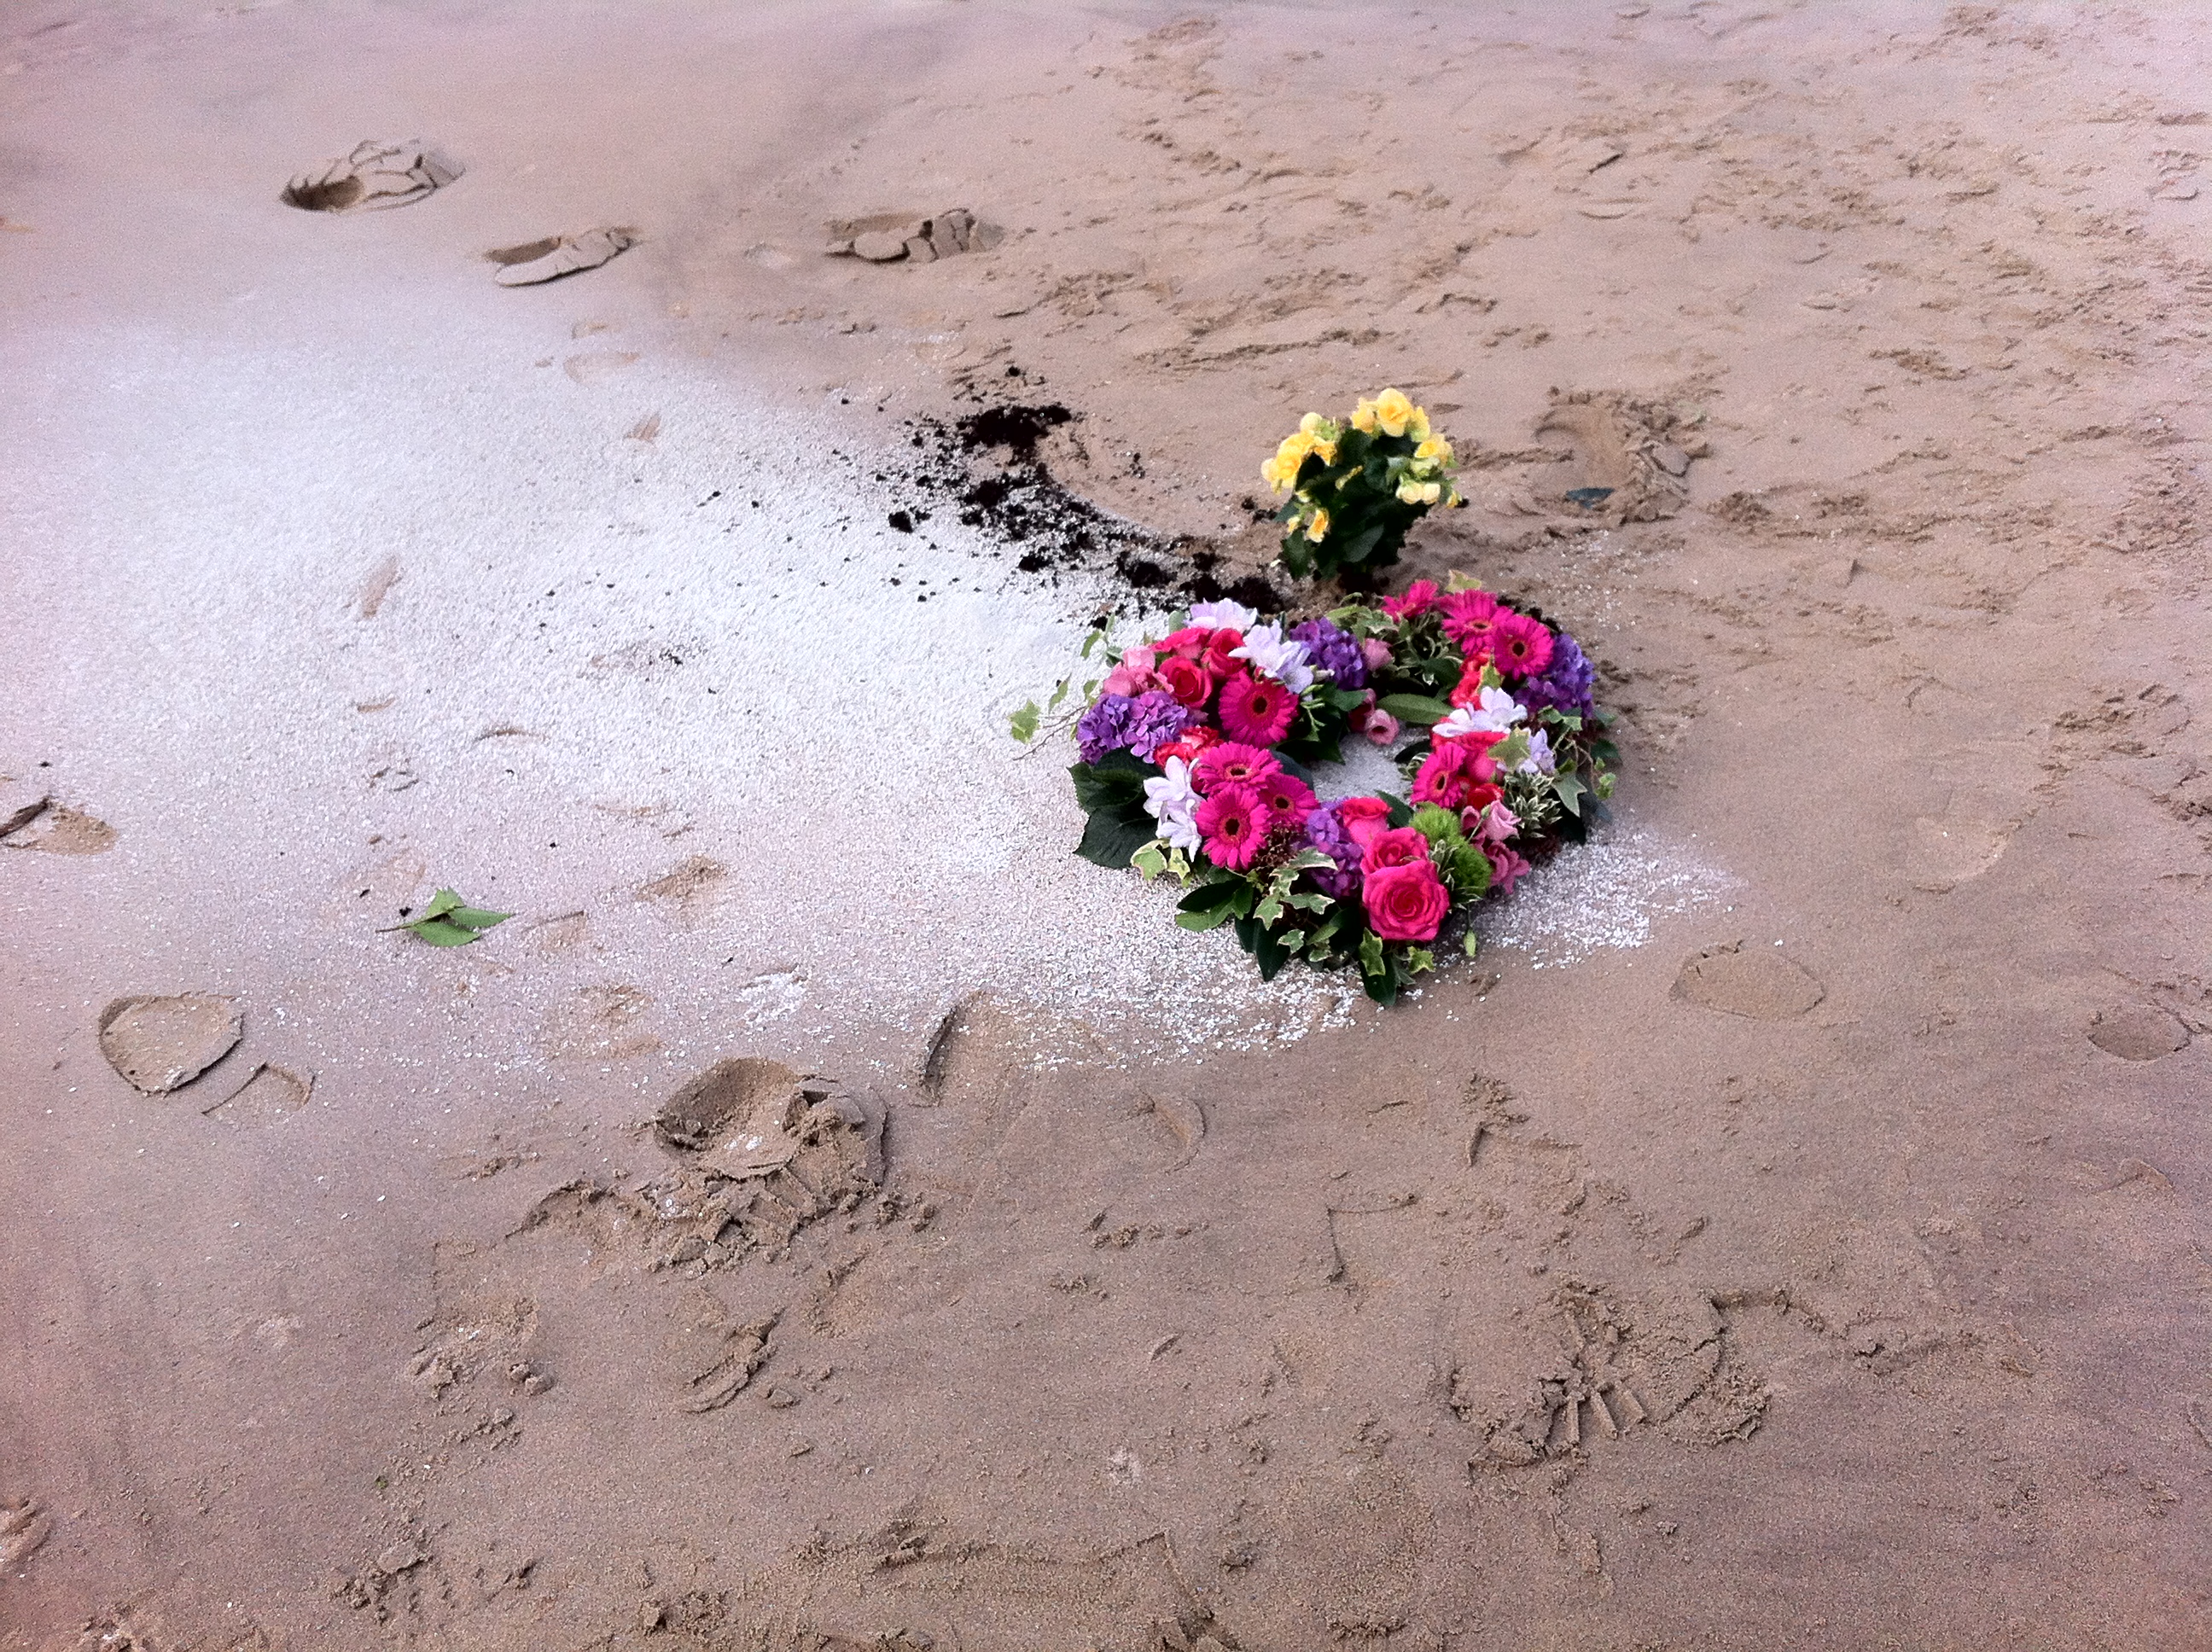 Funeral wreath lain on top of ashes scattered on the beach